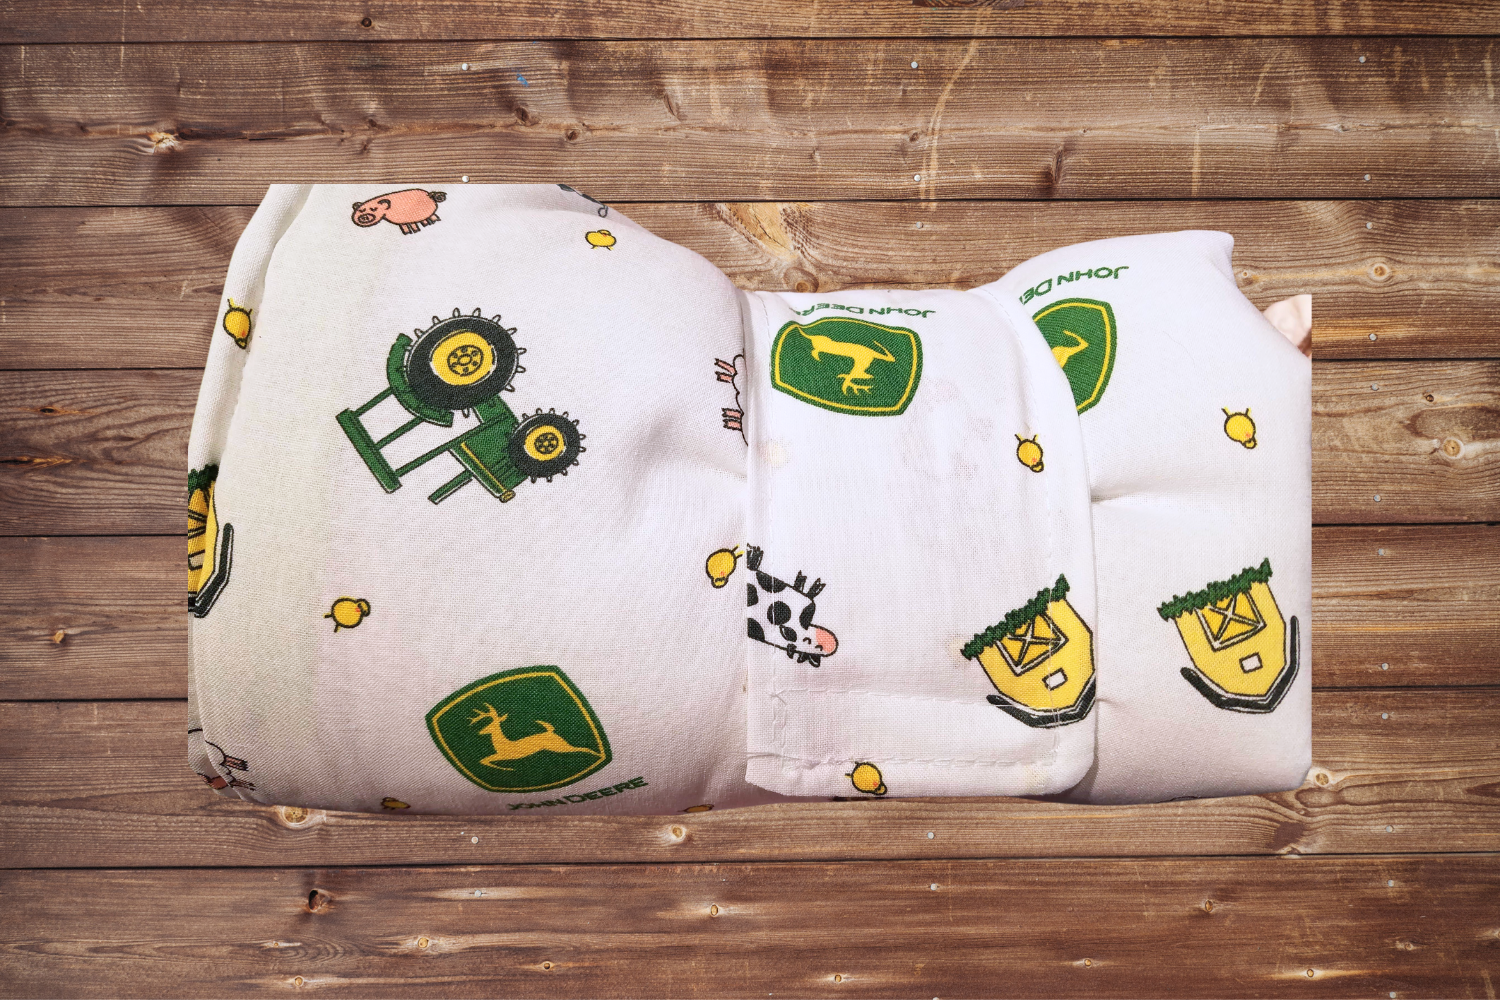 On the Go Changing Pad- John Deere Tractors and Black Minky Interior - DBC Baby Bedding Co 